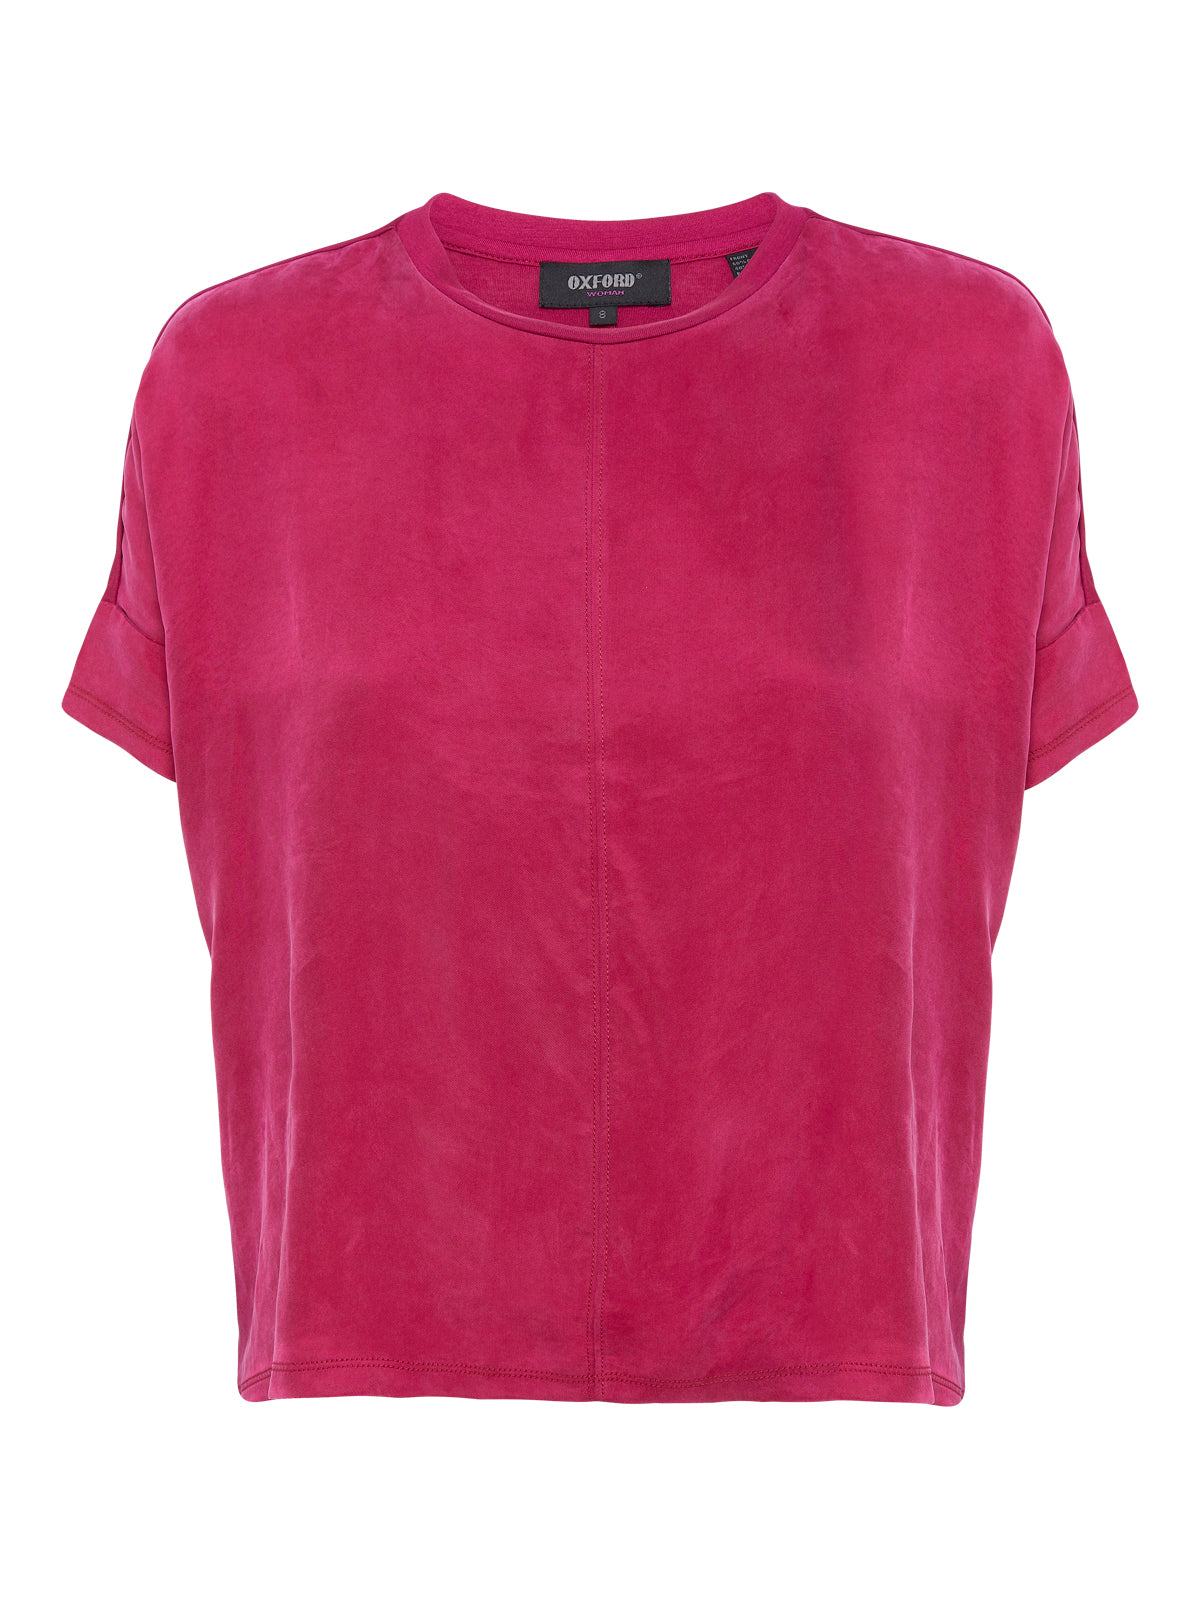 ARIA WOVEN FRONT T-SHIRT